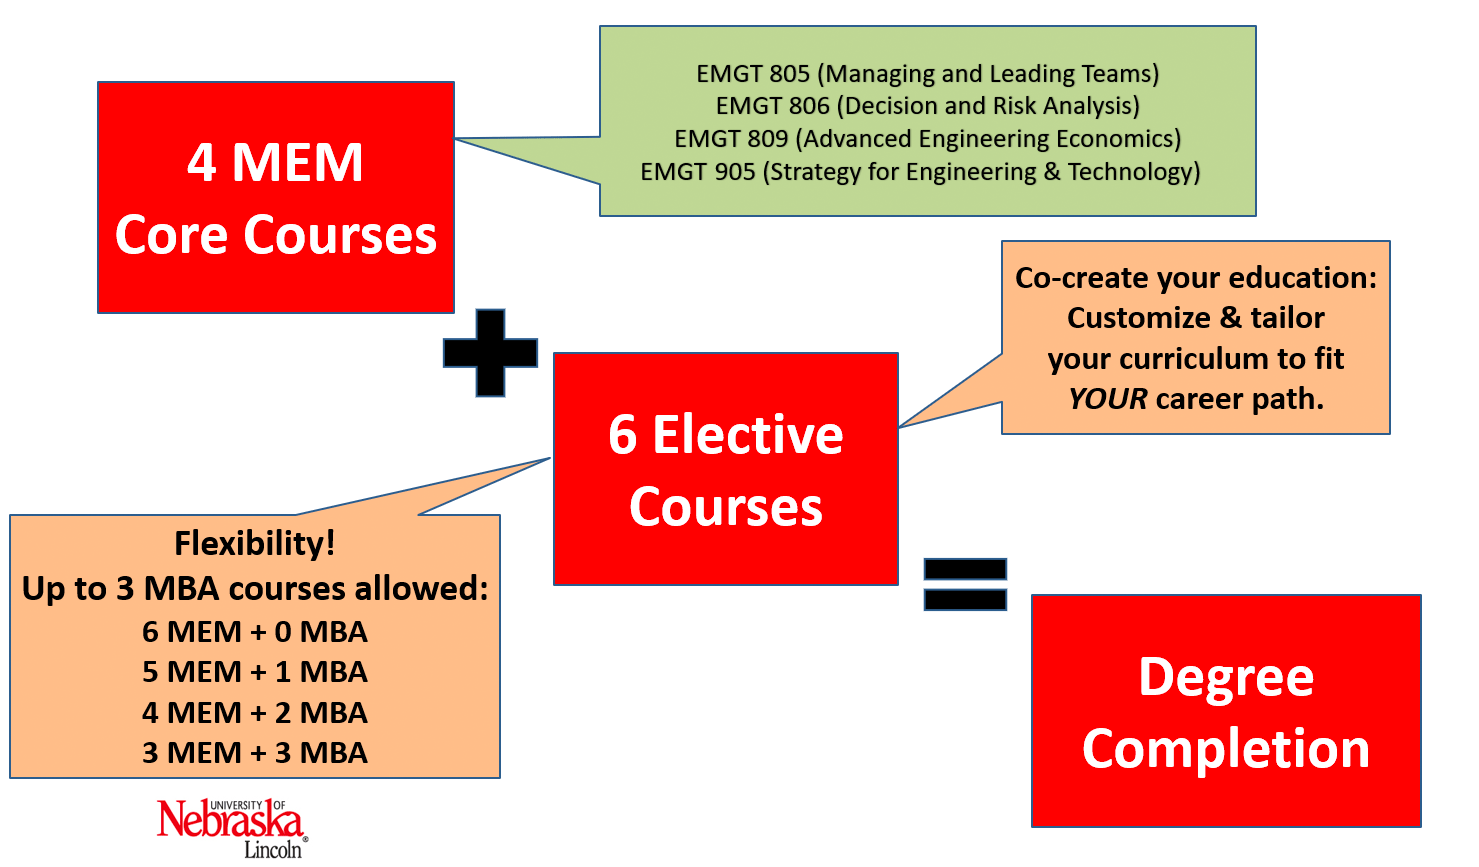 Chart displaying 4 MEM Core Courses (EMGT 805, 806, 809 and 905) + 6 Elective Courses = Degree Completion